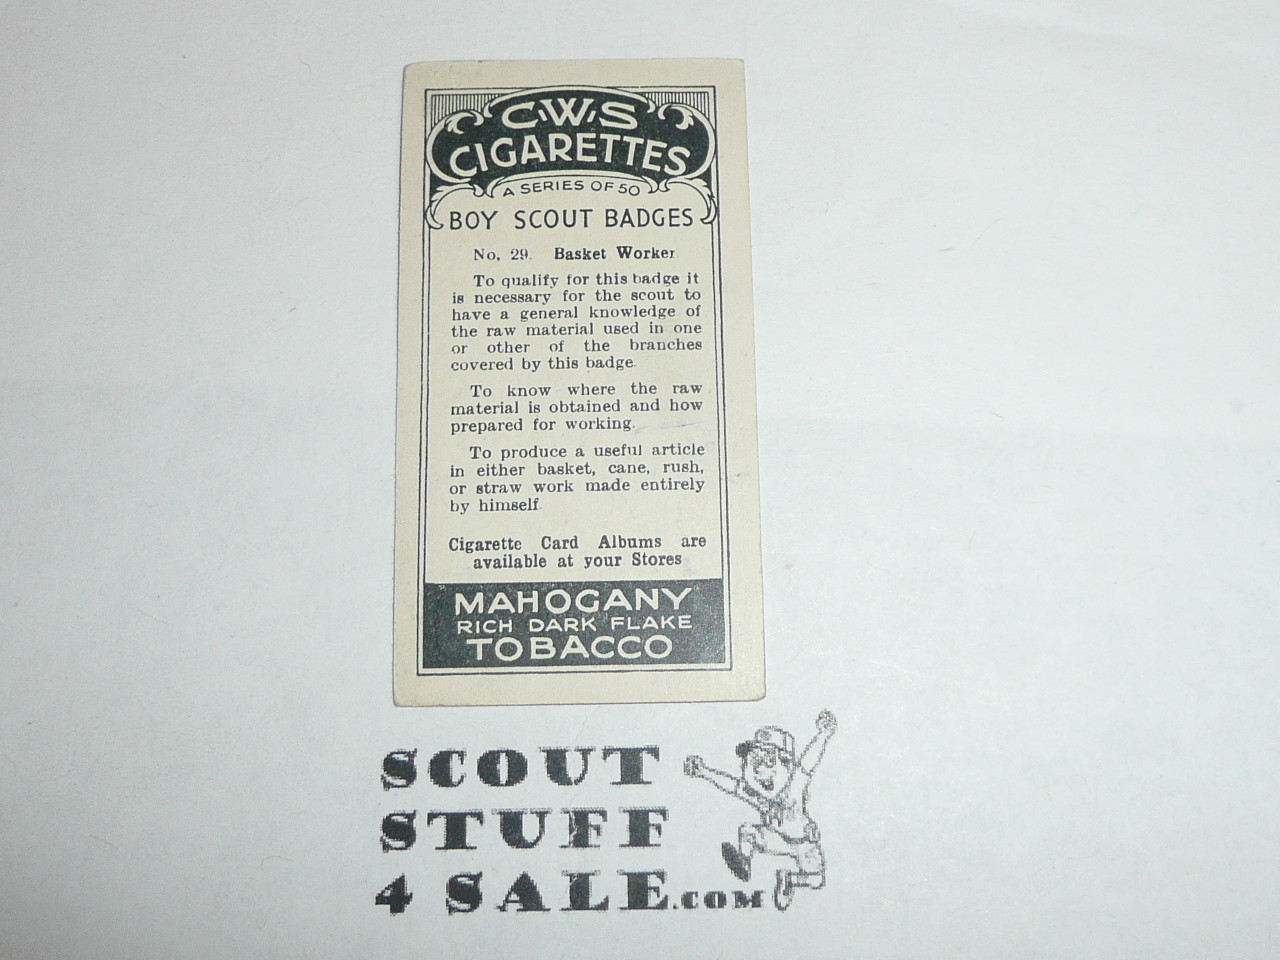 CWS Cigarette Company Premium Card, Boy Scout Badges Series of 50, Card #29 Basket Worker, 1939